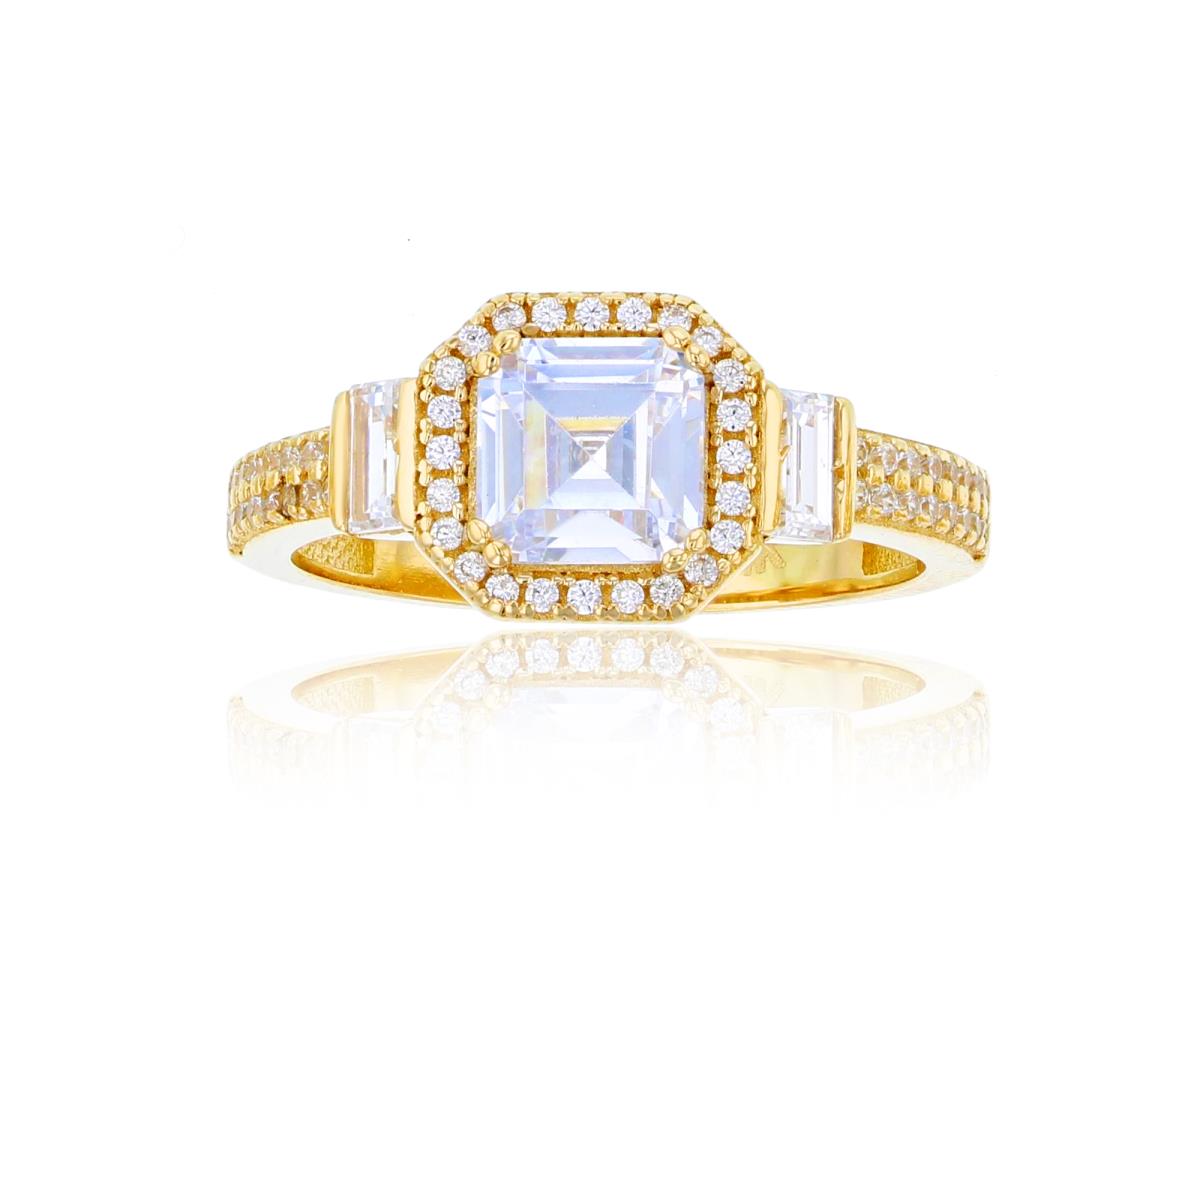 14K Yellow Gold 6mm Asscher Cut CZ Halo Baguette Sides & Micropave Fashion Ring